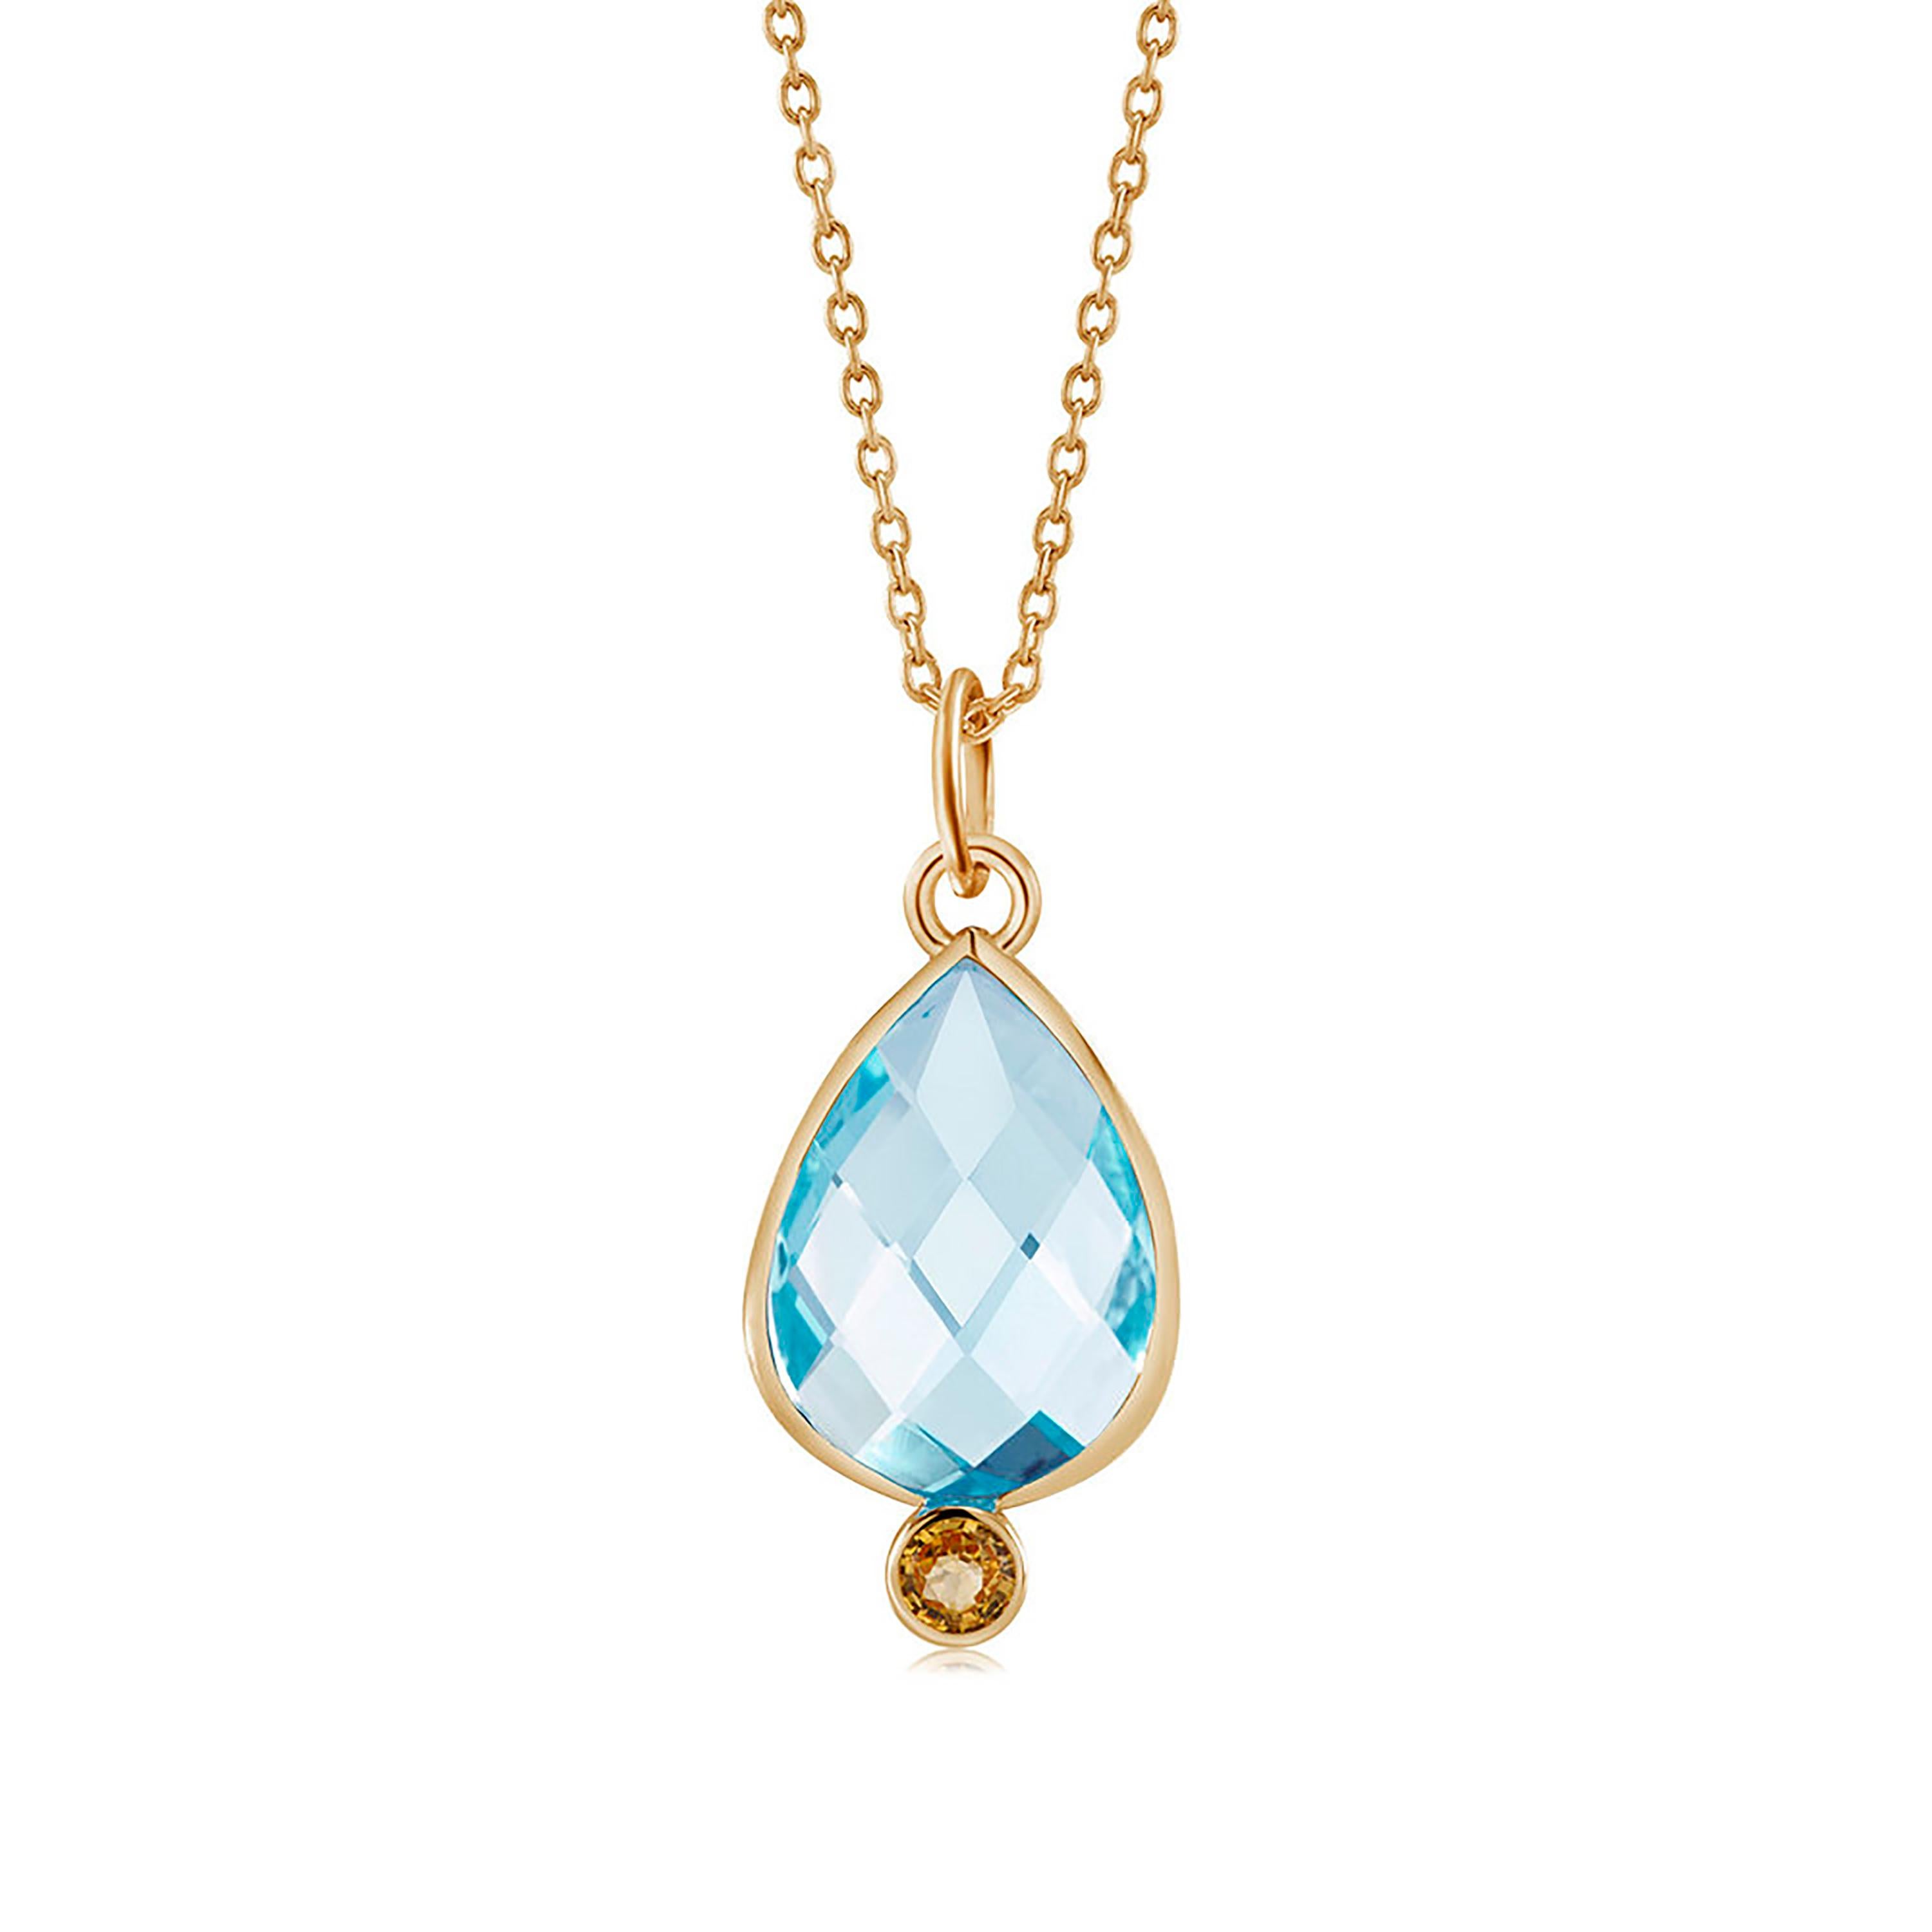 Contemporary Double Sided Briolette Blue Topaz Silver Pendant Necklace Yellow Gold-Plated